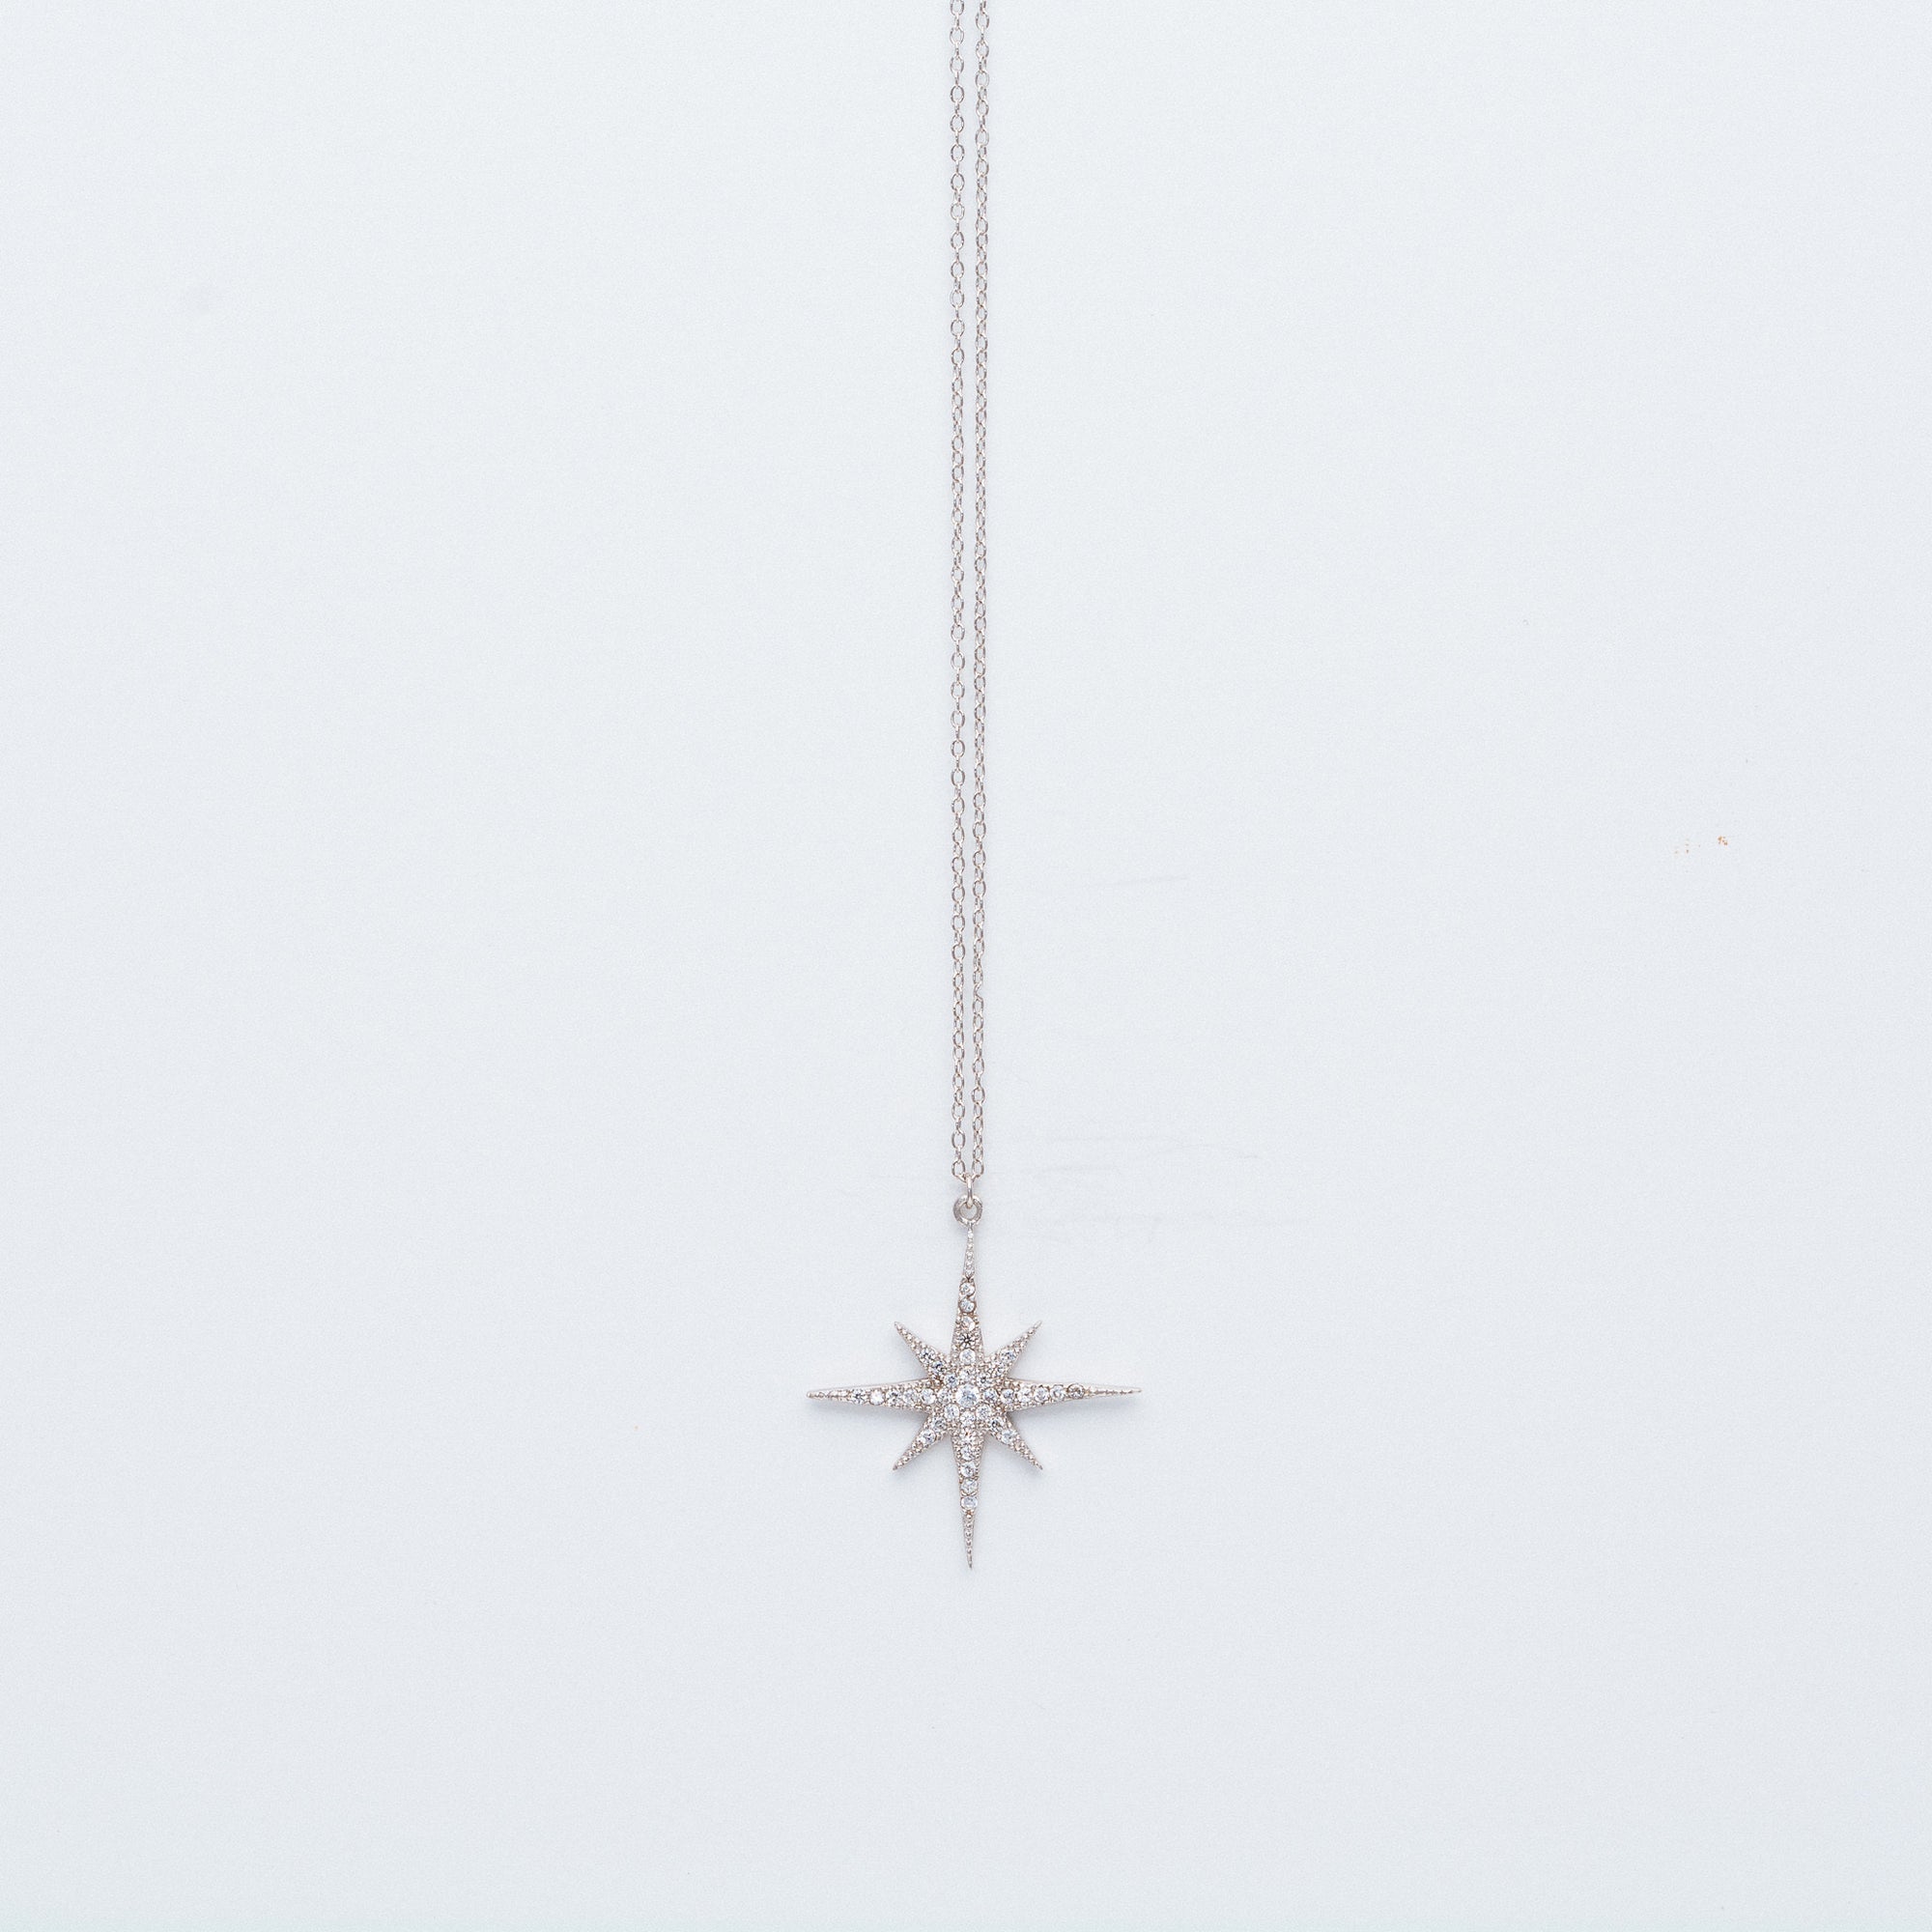 NSC - Large Pave Star Necklace